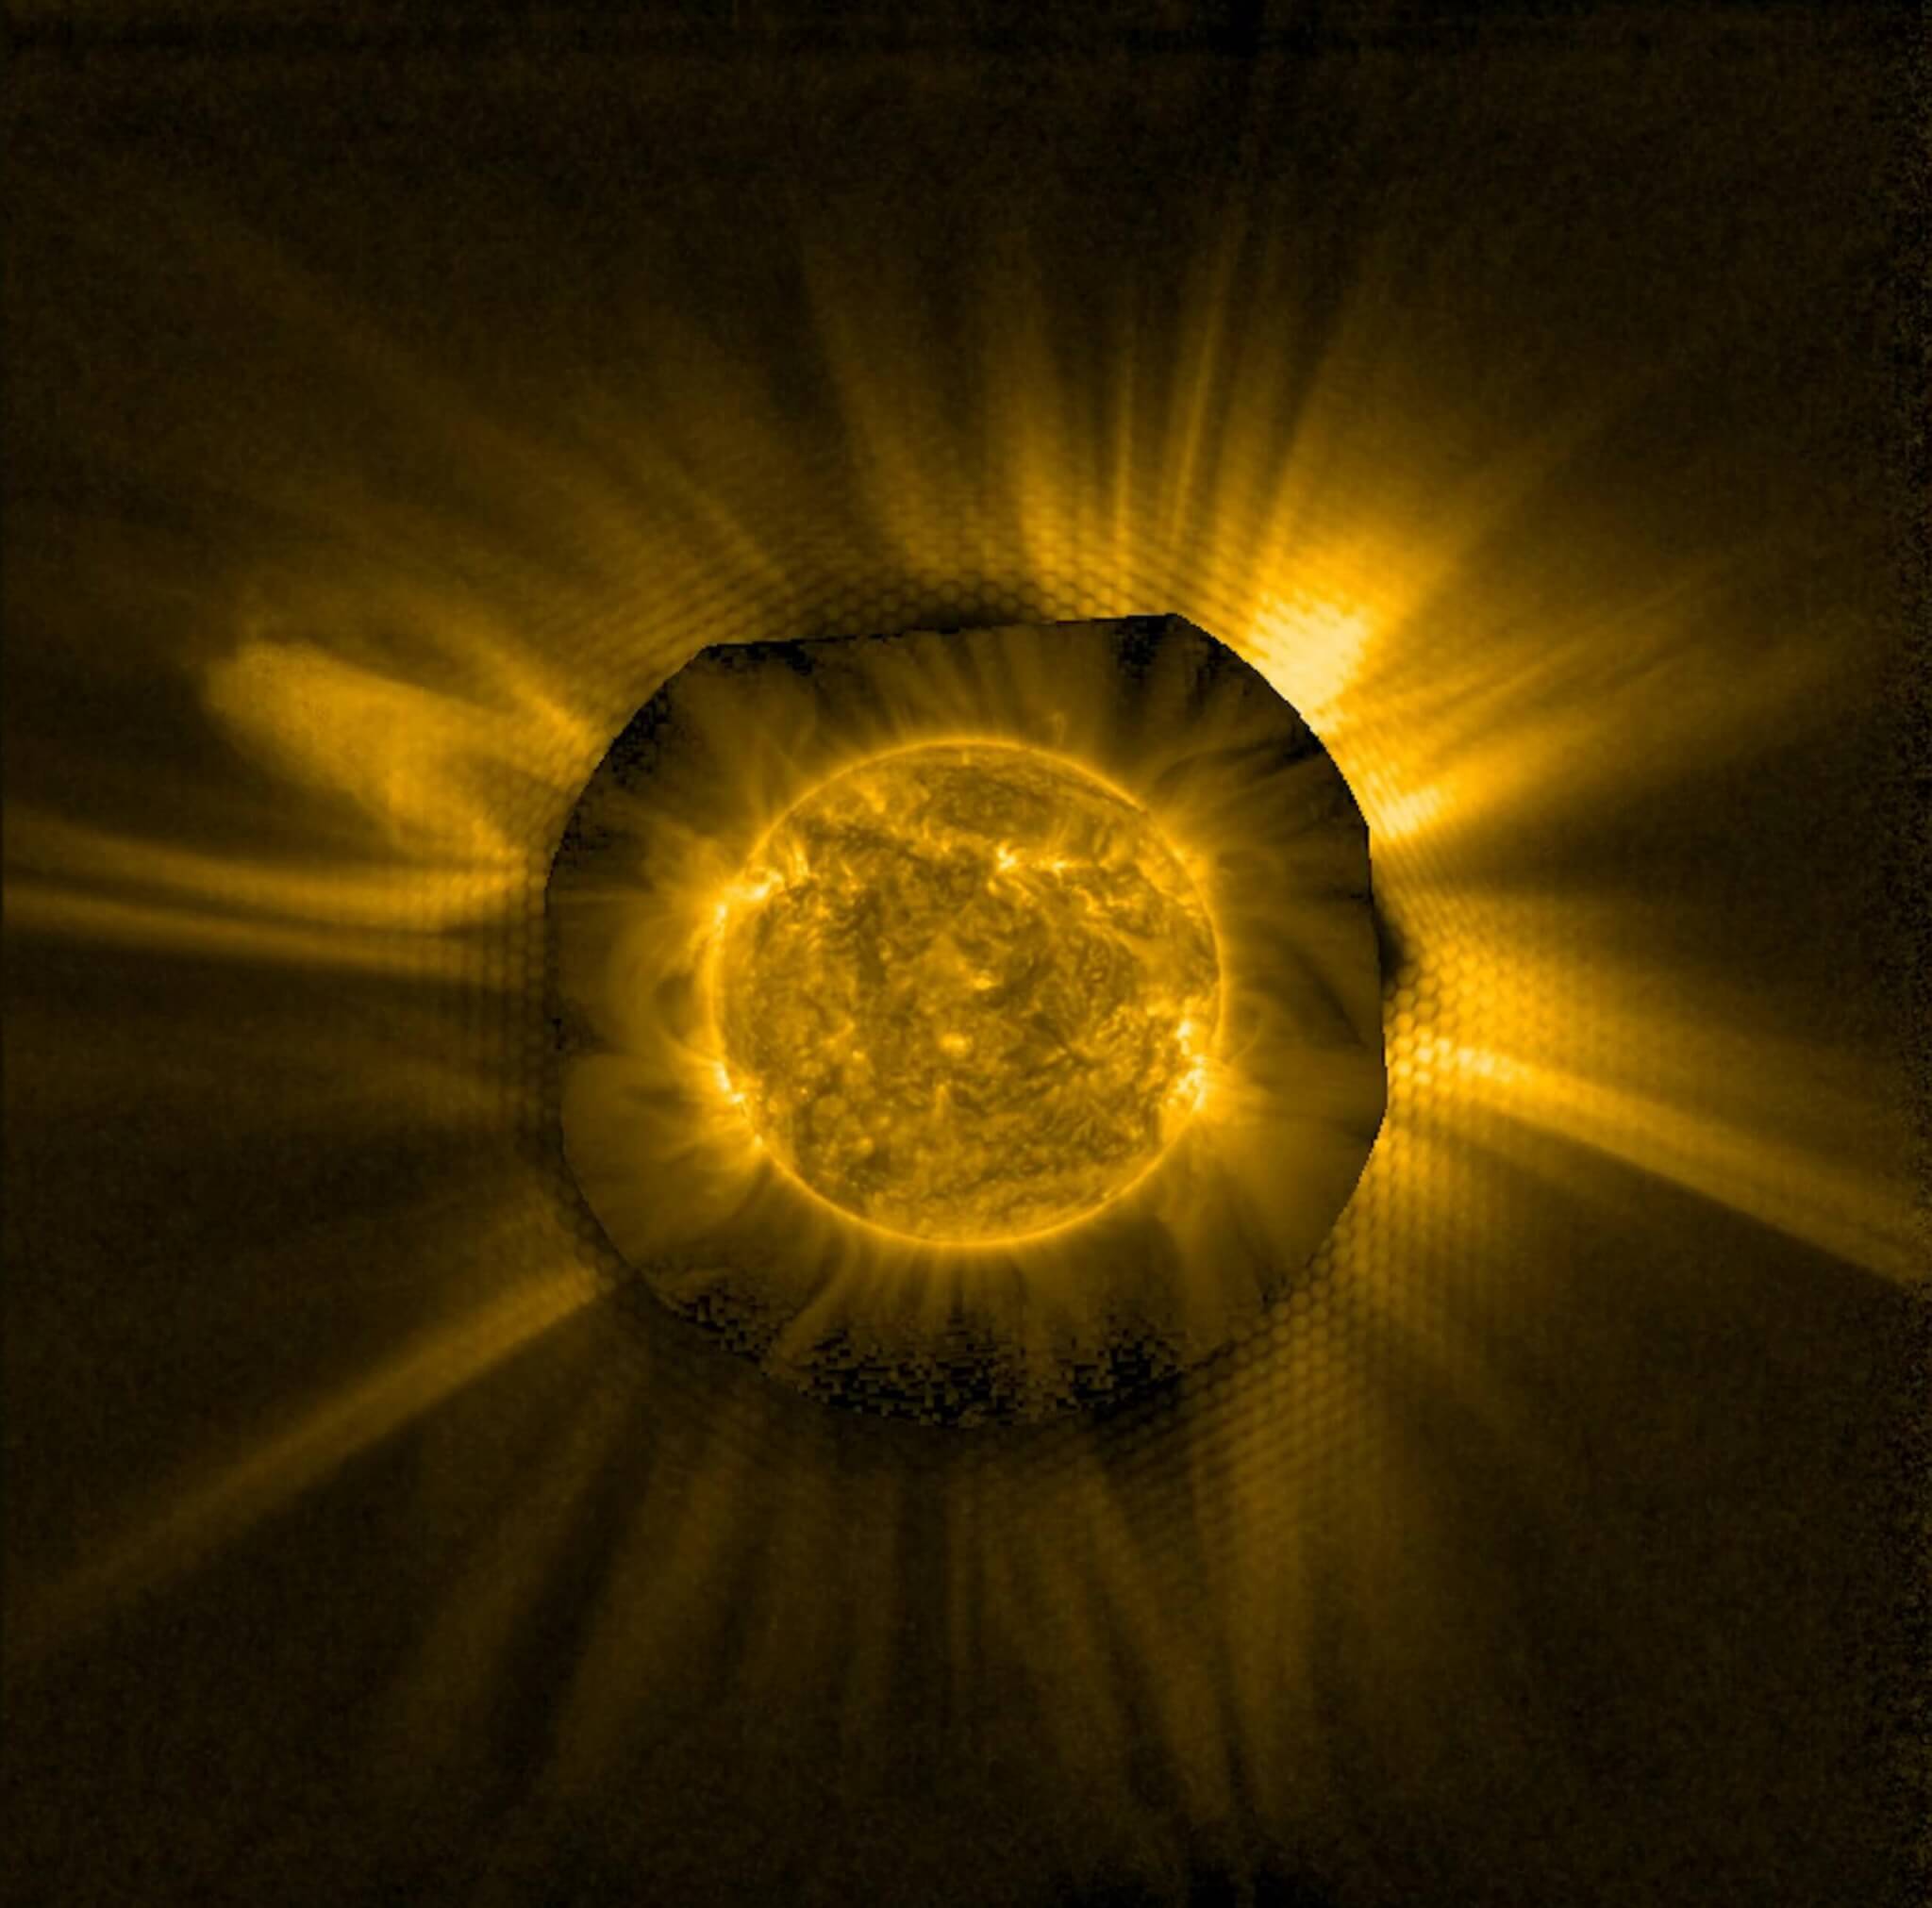 Spacecraft "hack" leads to never-before-seen views of the Sun